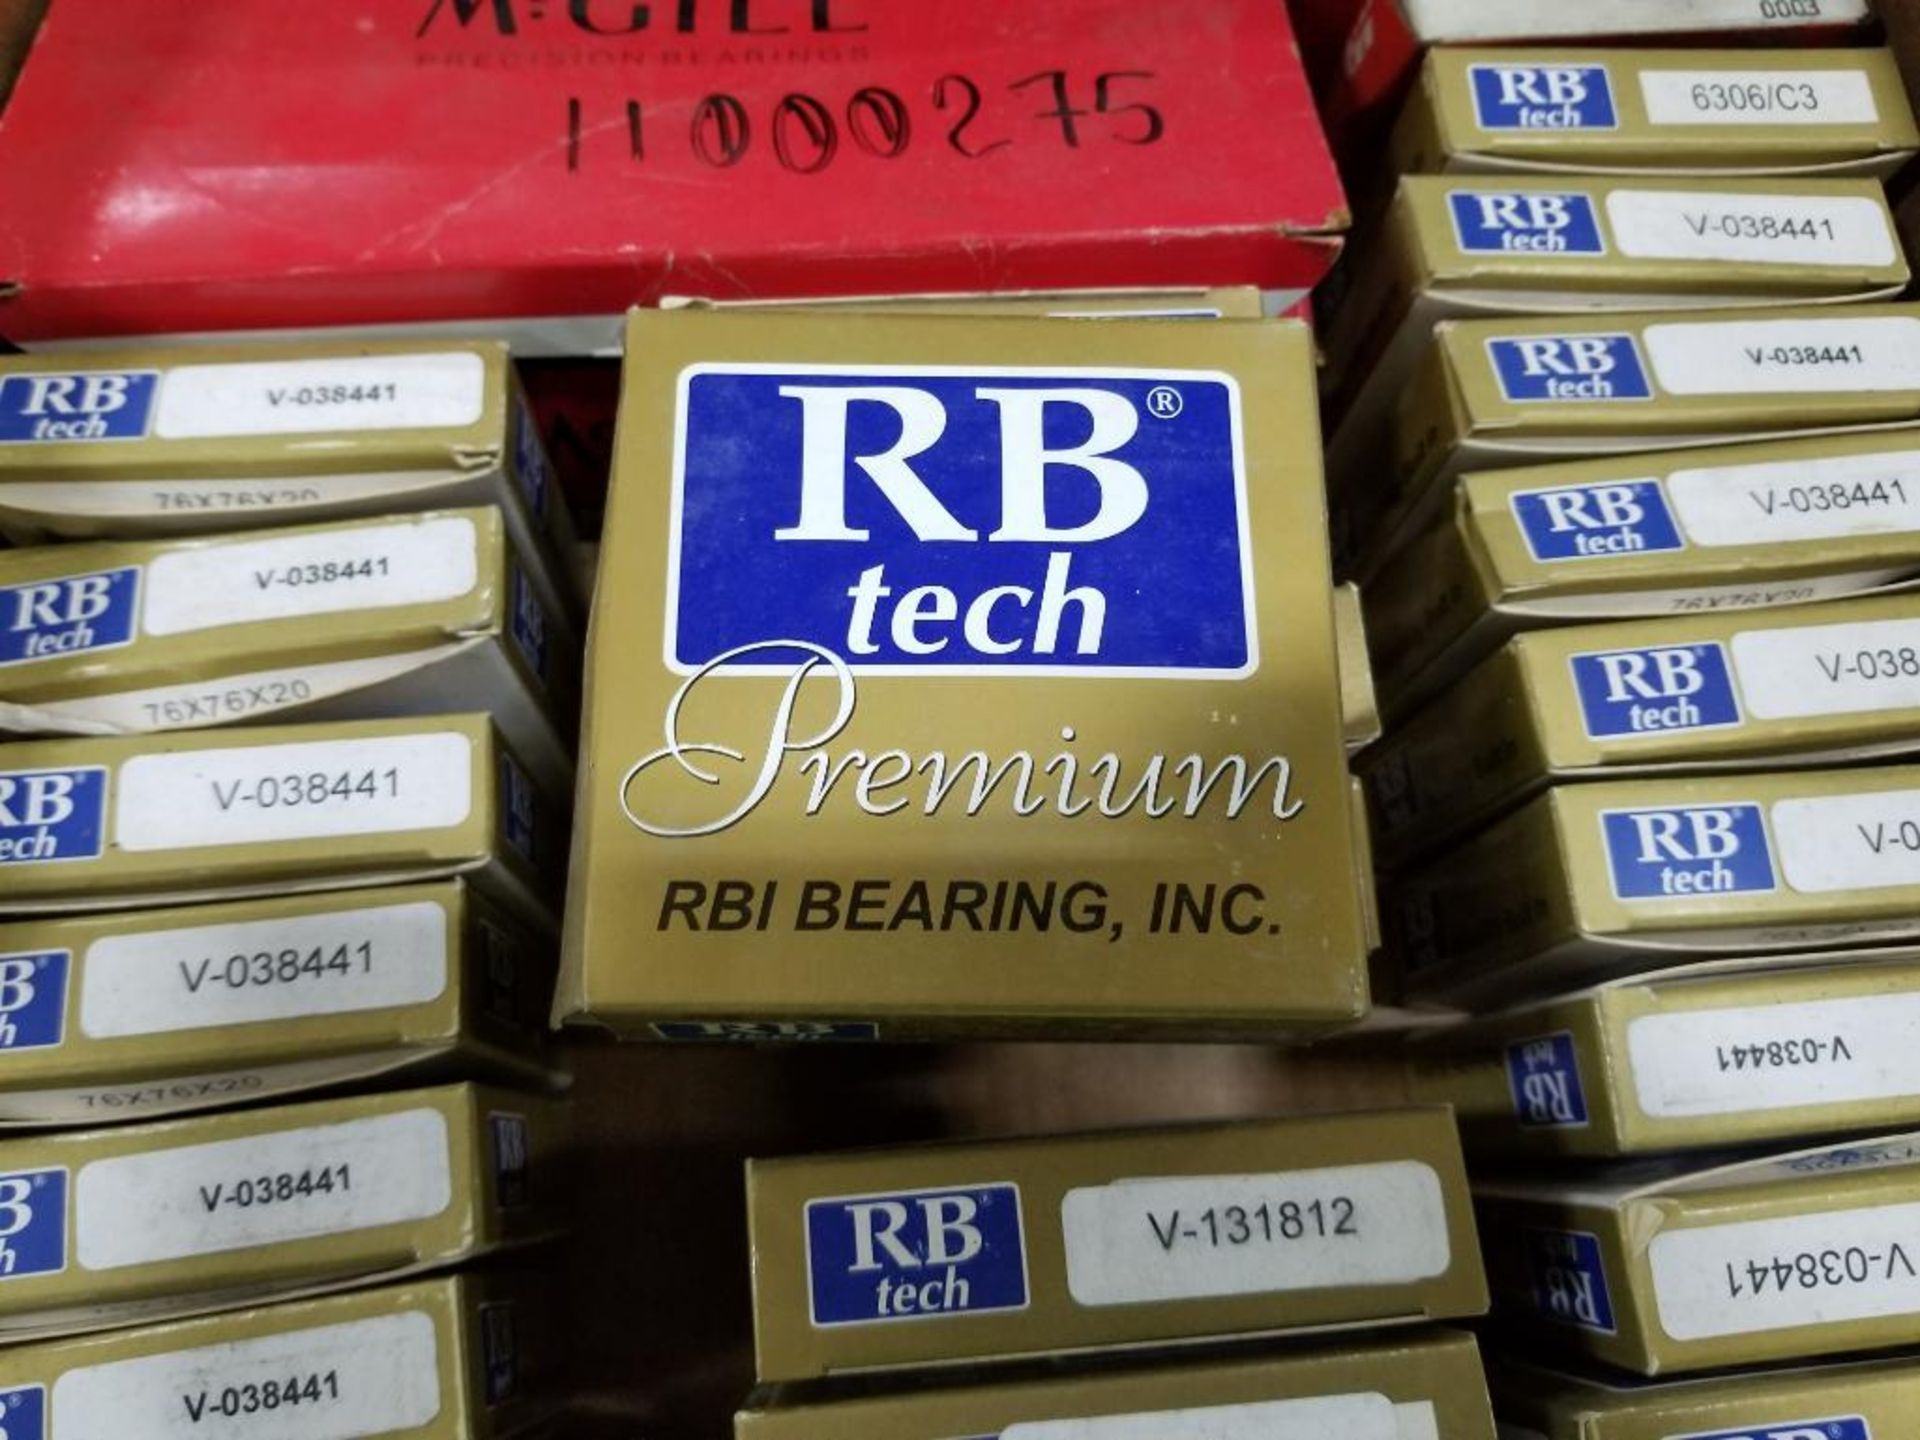 McGill and RB Tech bearings. - Image 5 of 9